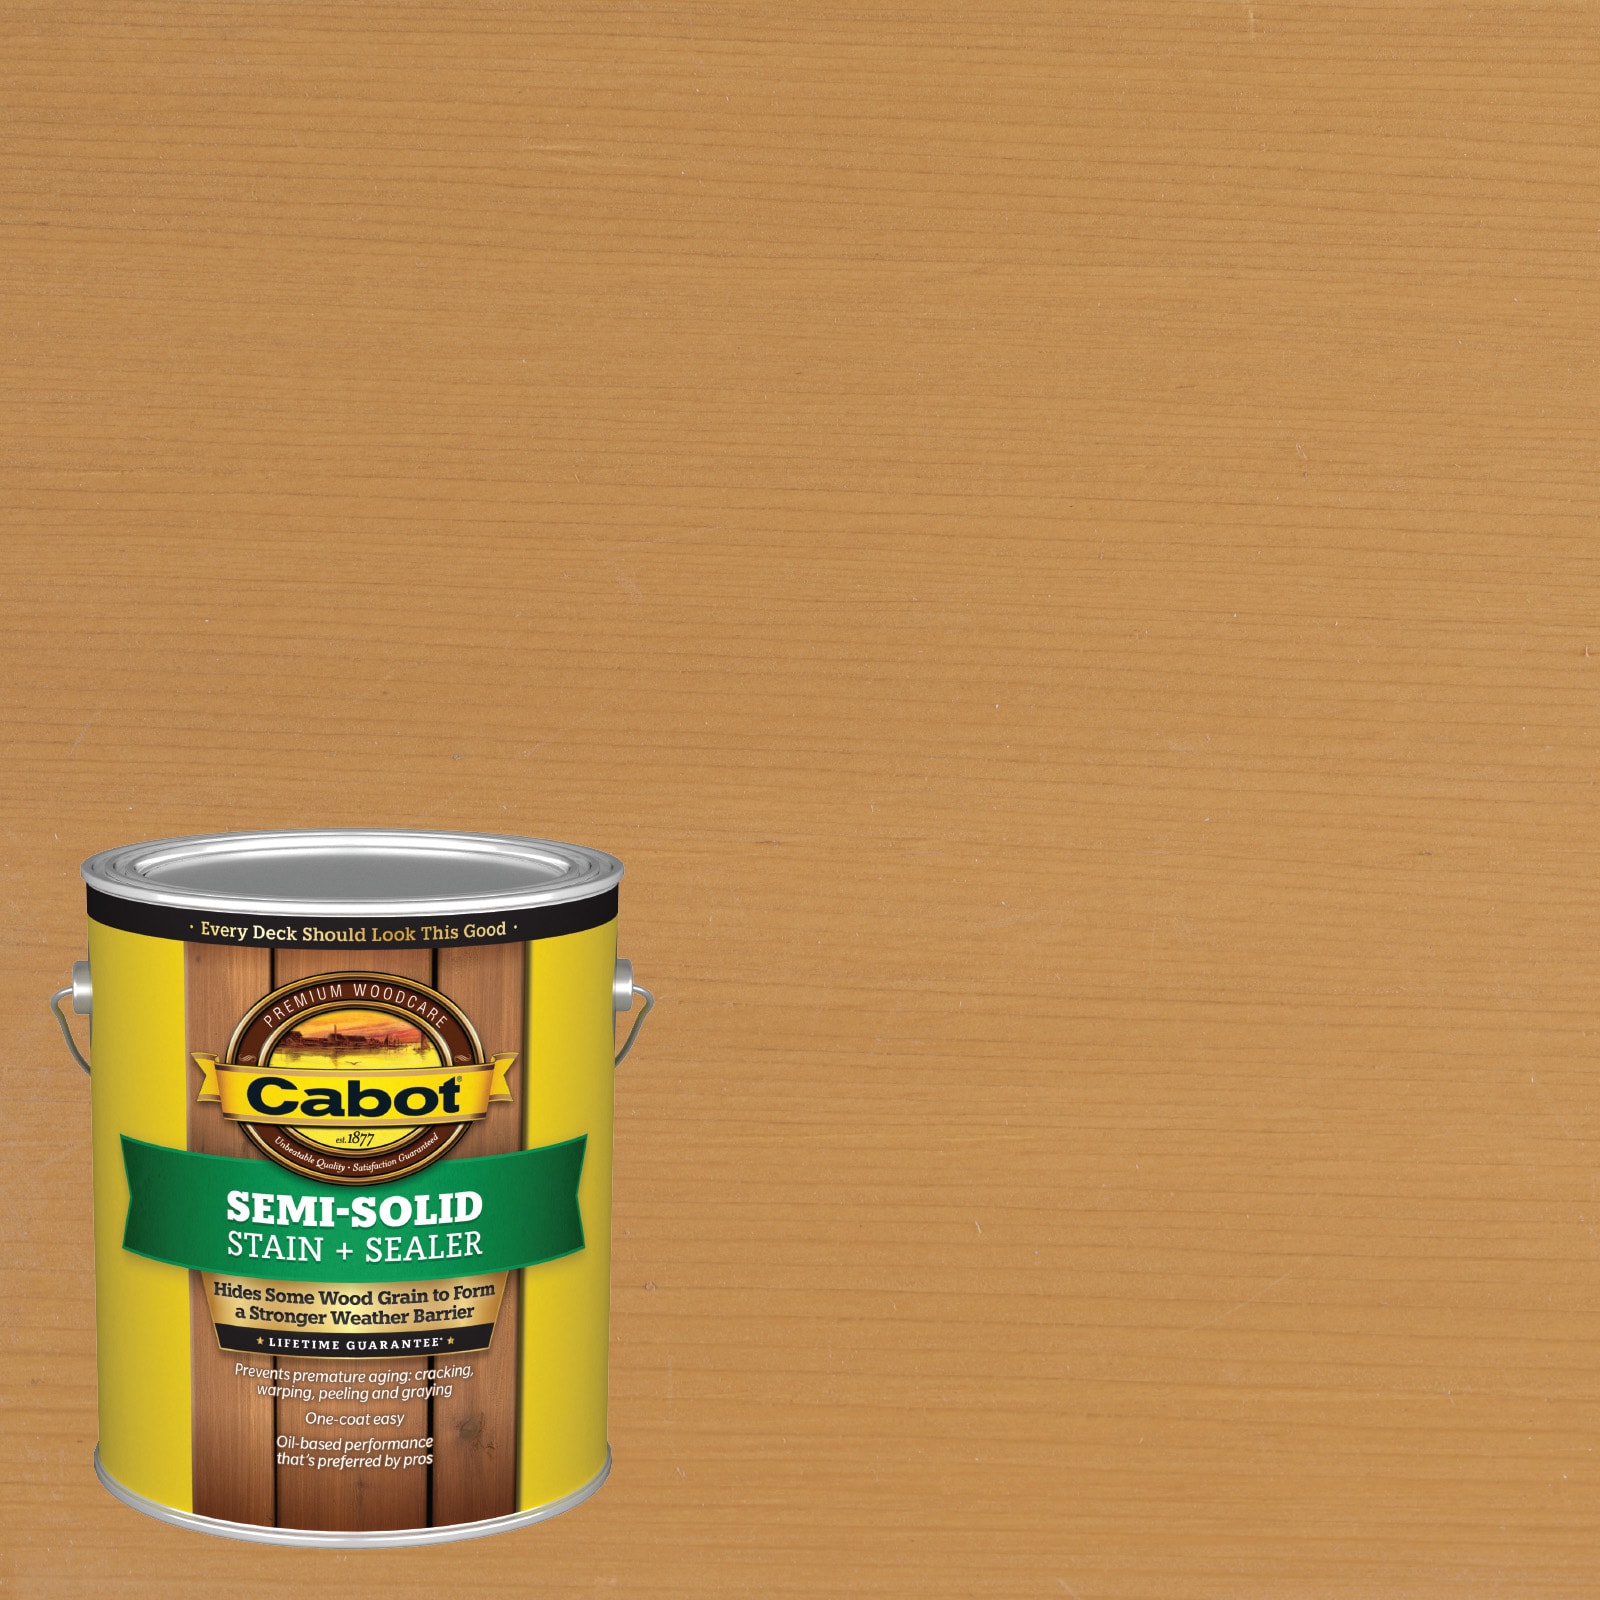 New Cedar Semi-solid Exterior Wood Stain and Sealer (1-Gallon) in Brown | - Cabot NEW CEDAR-238818